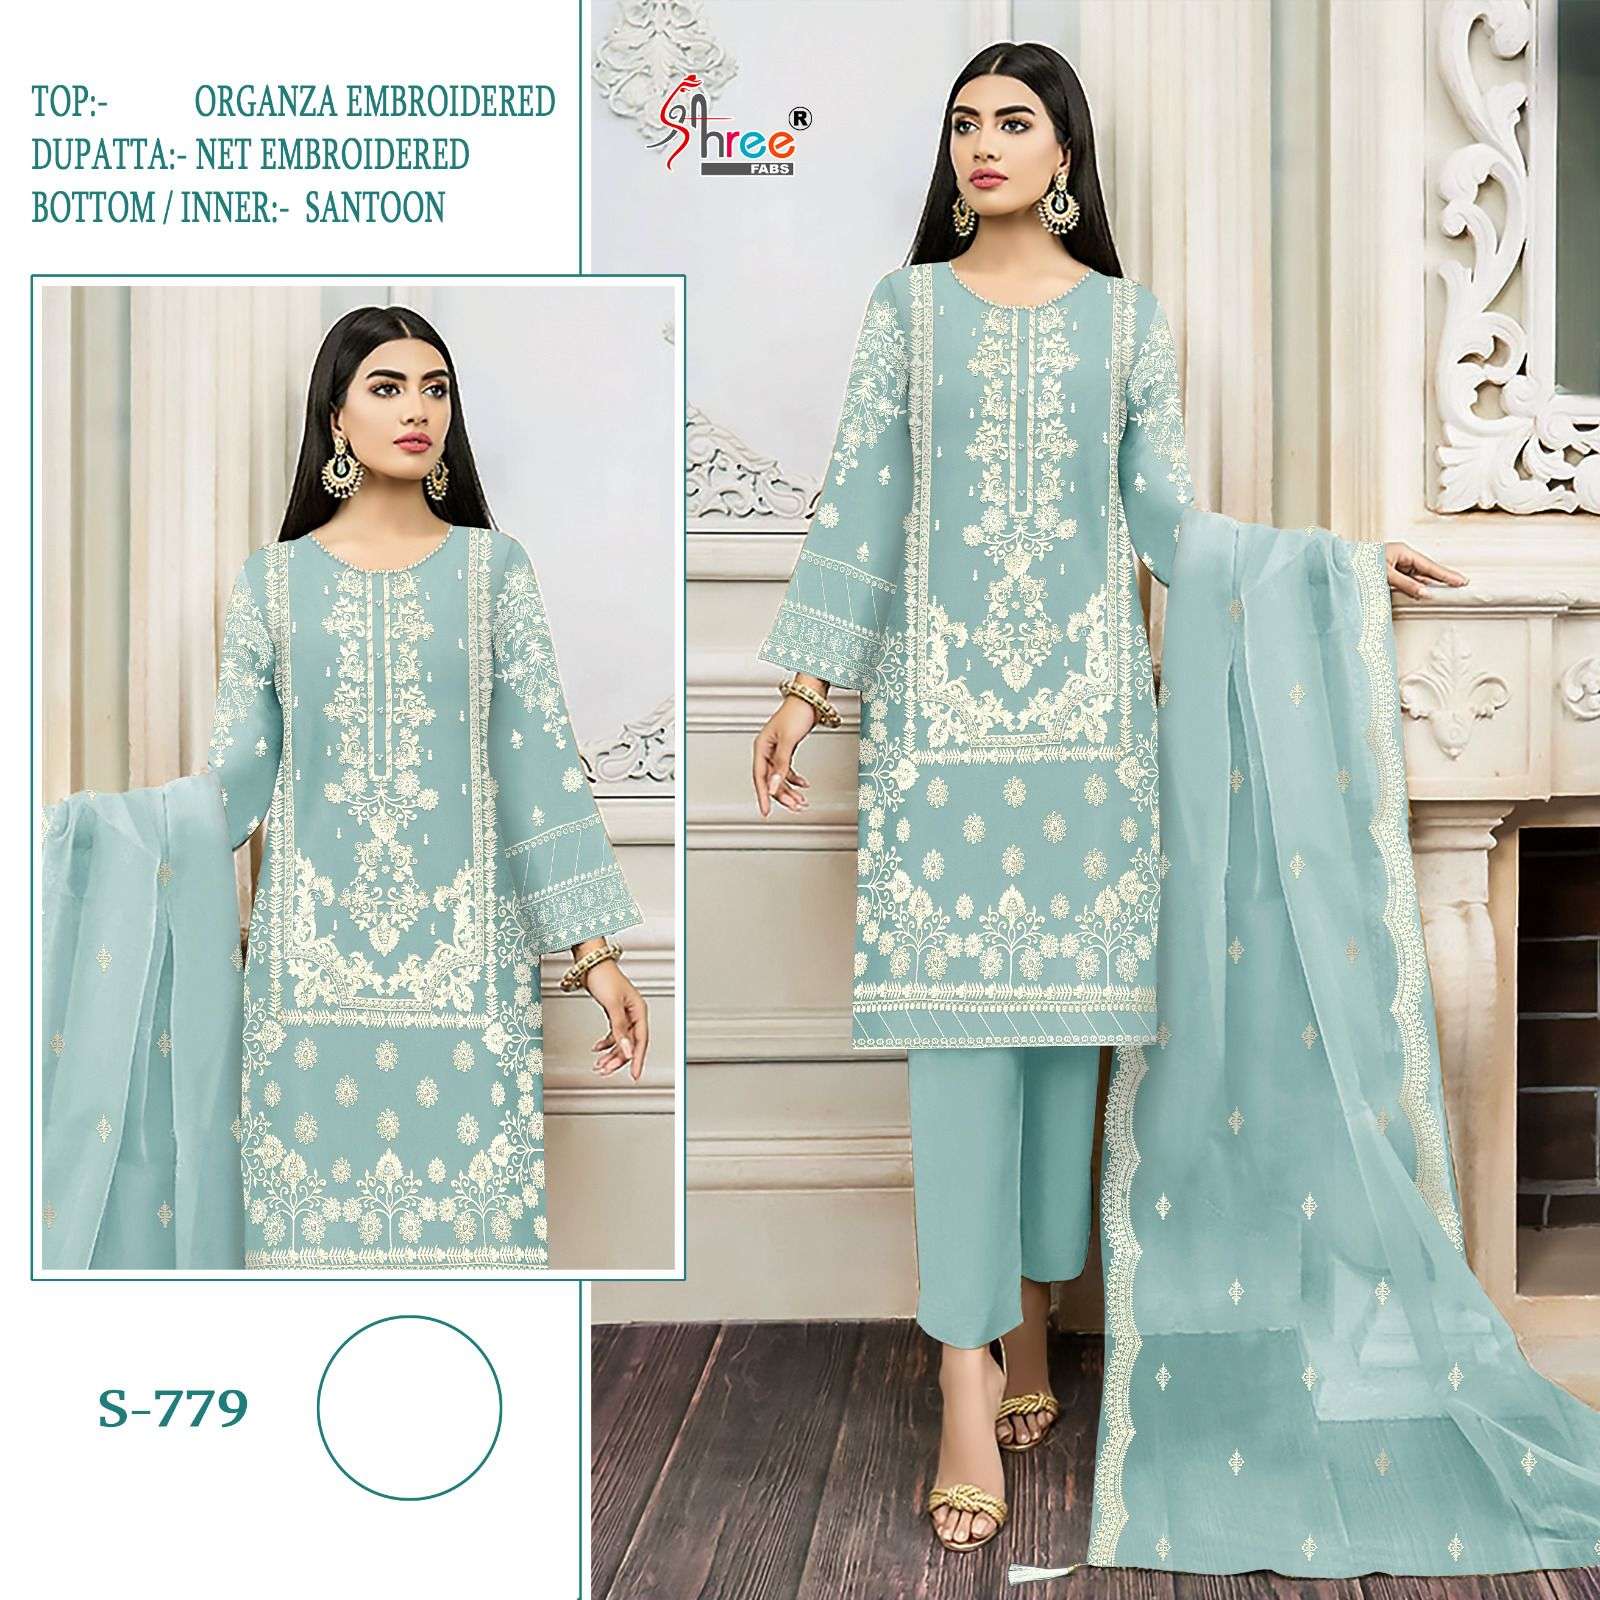 SHREE FABS S 779 ORGANZA WITH EMBROIDERY SALWAR SUITS AT WHO...